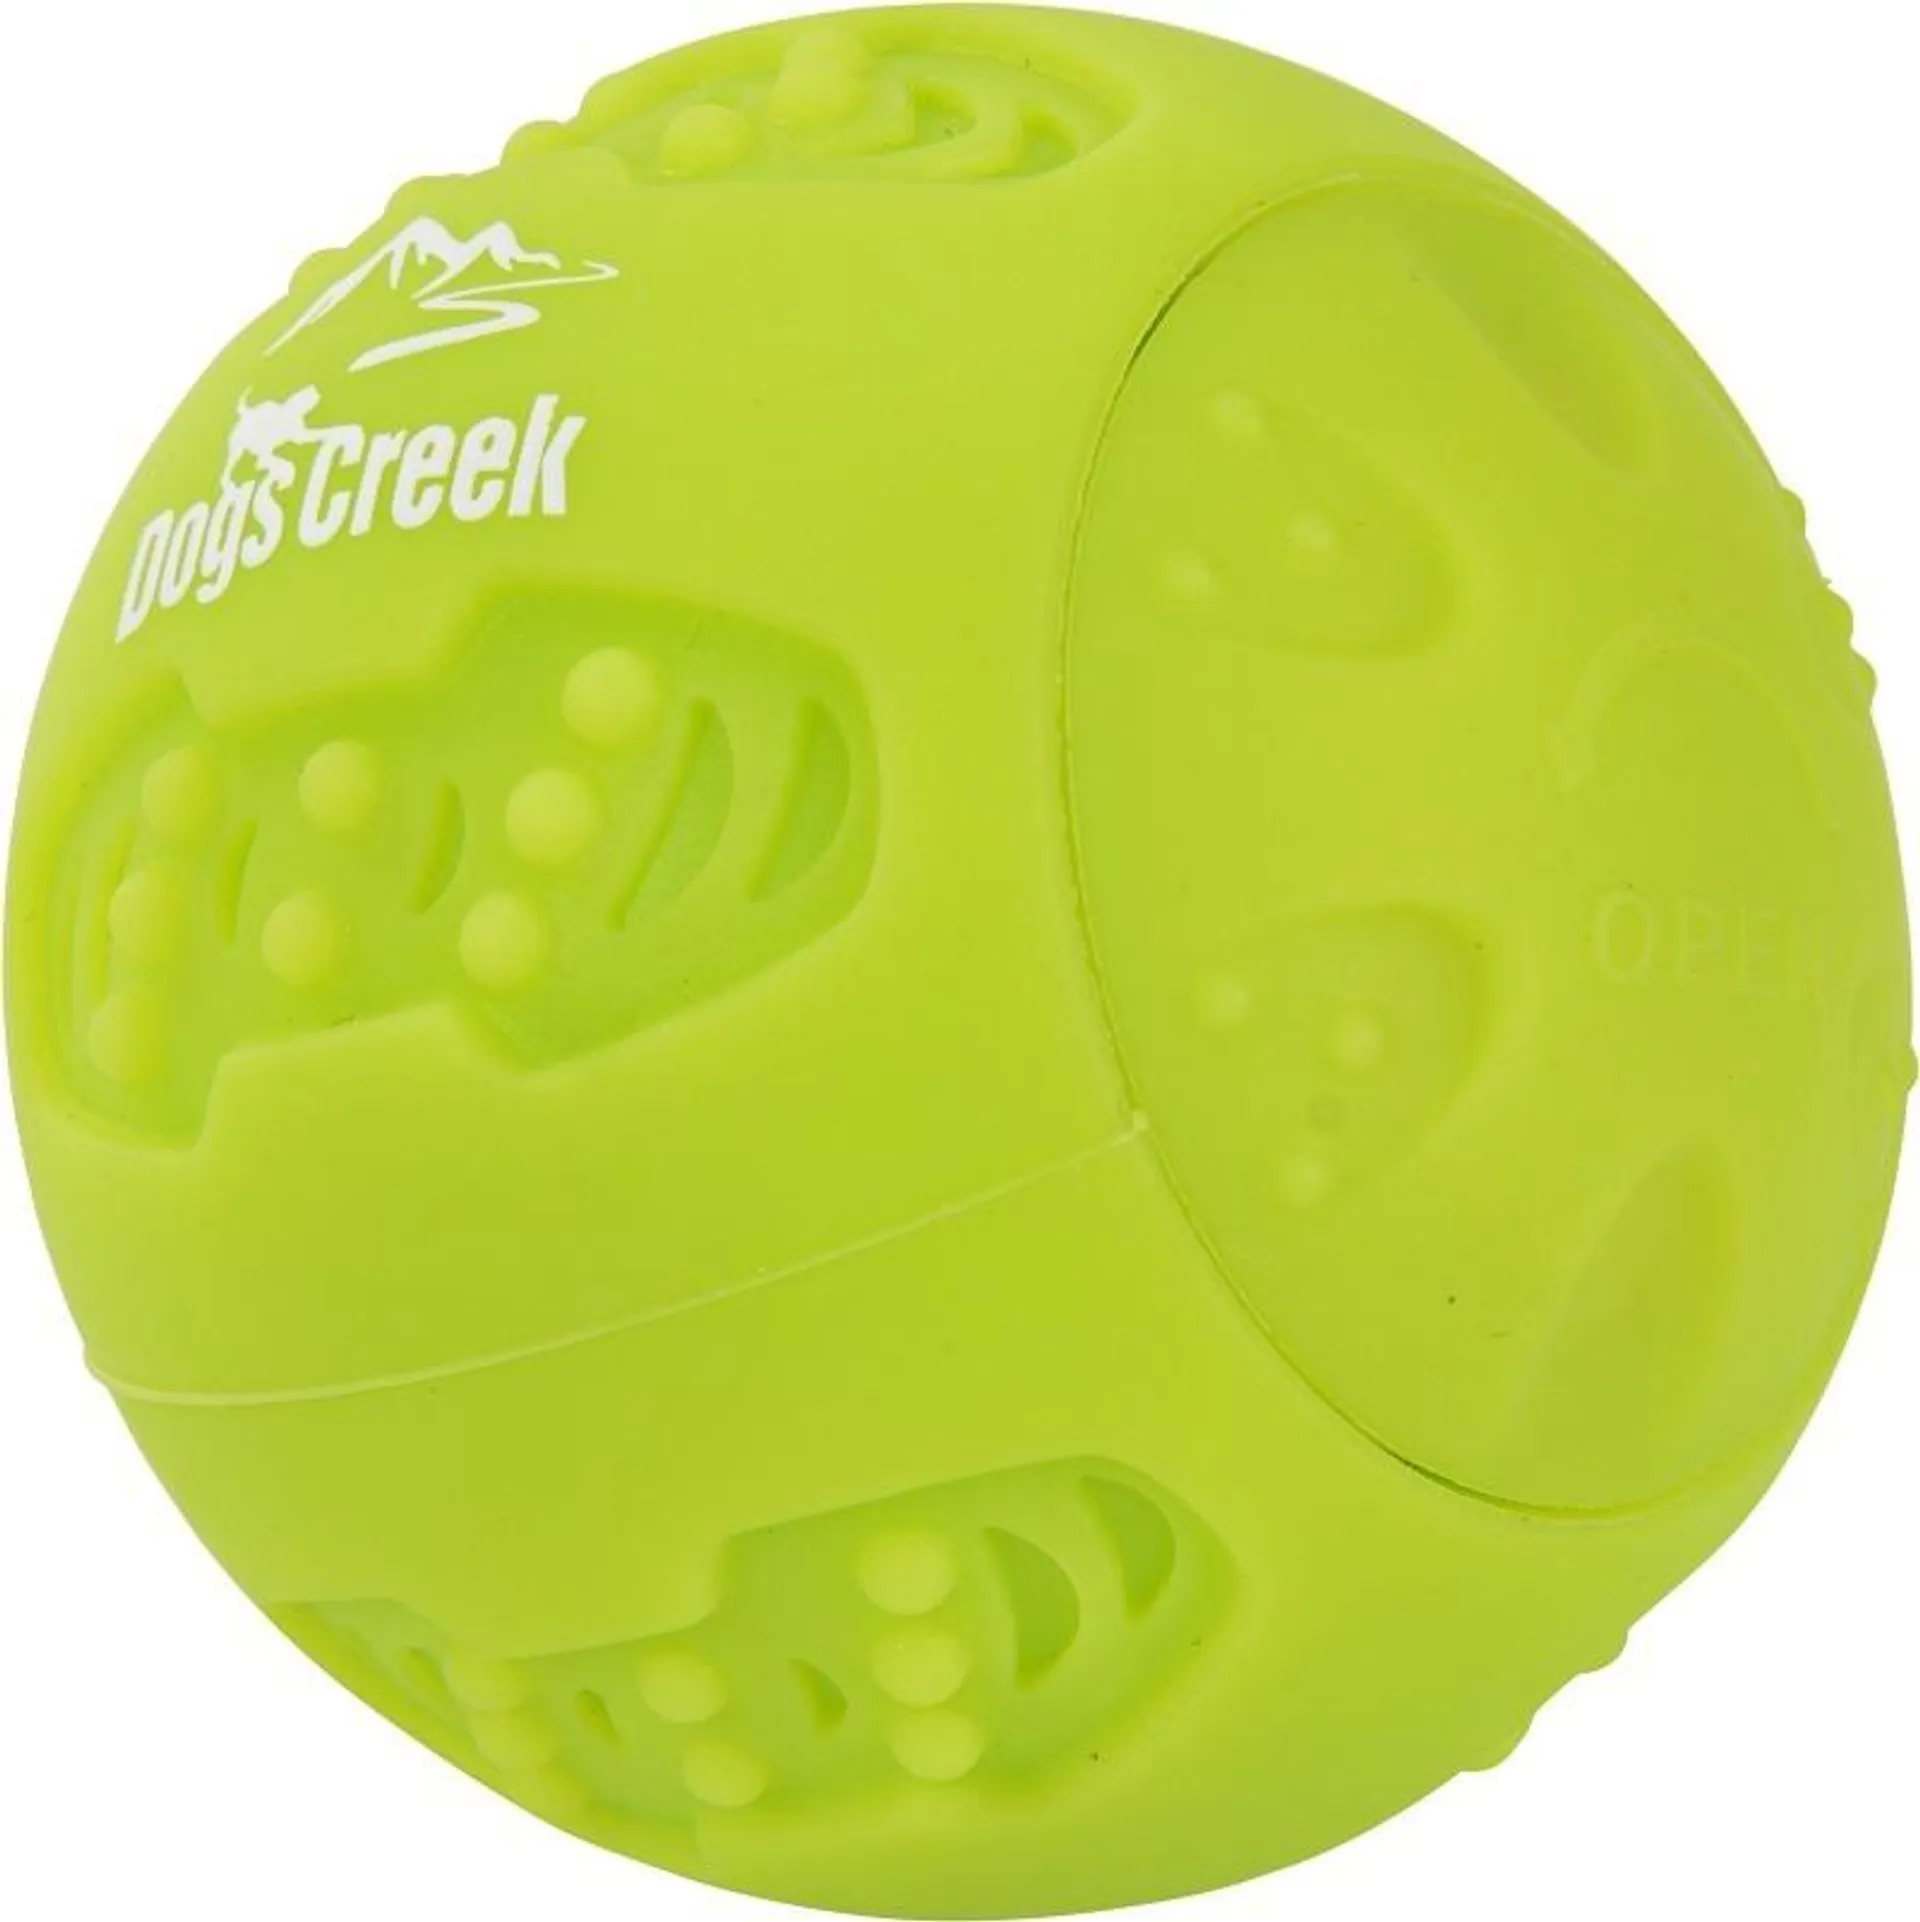 Dogs Creek Toy LED Ball Firefly